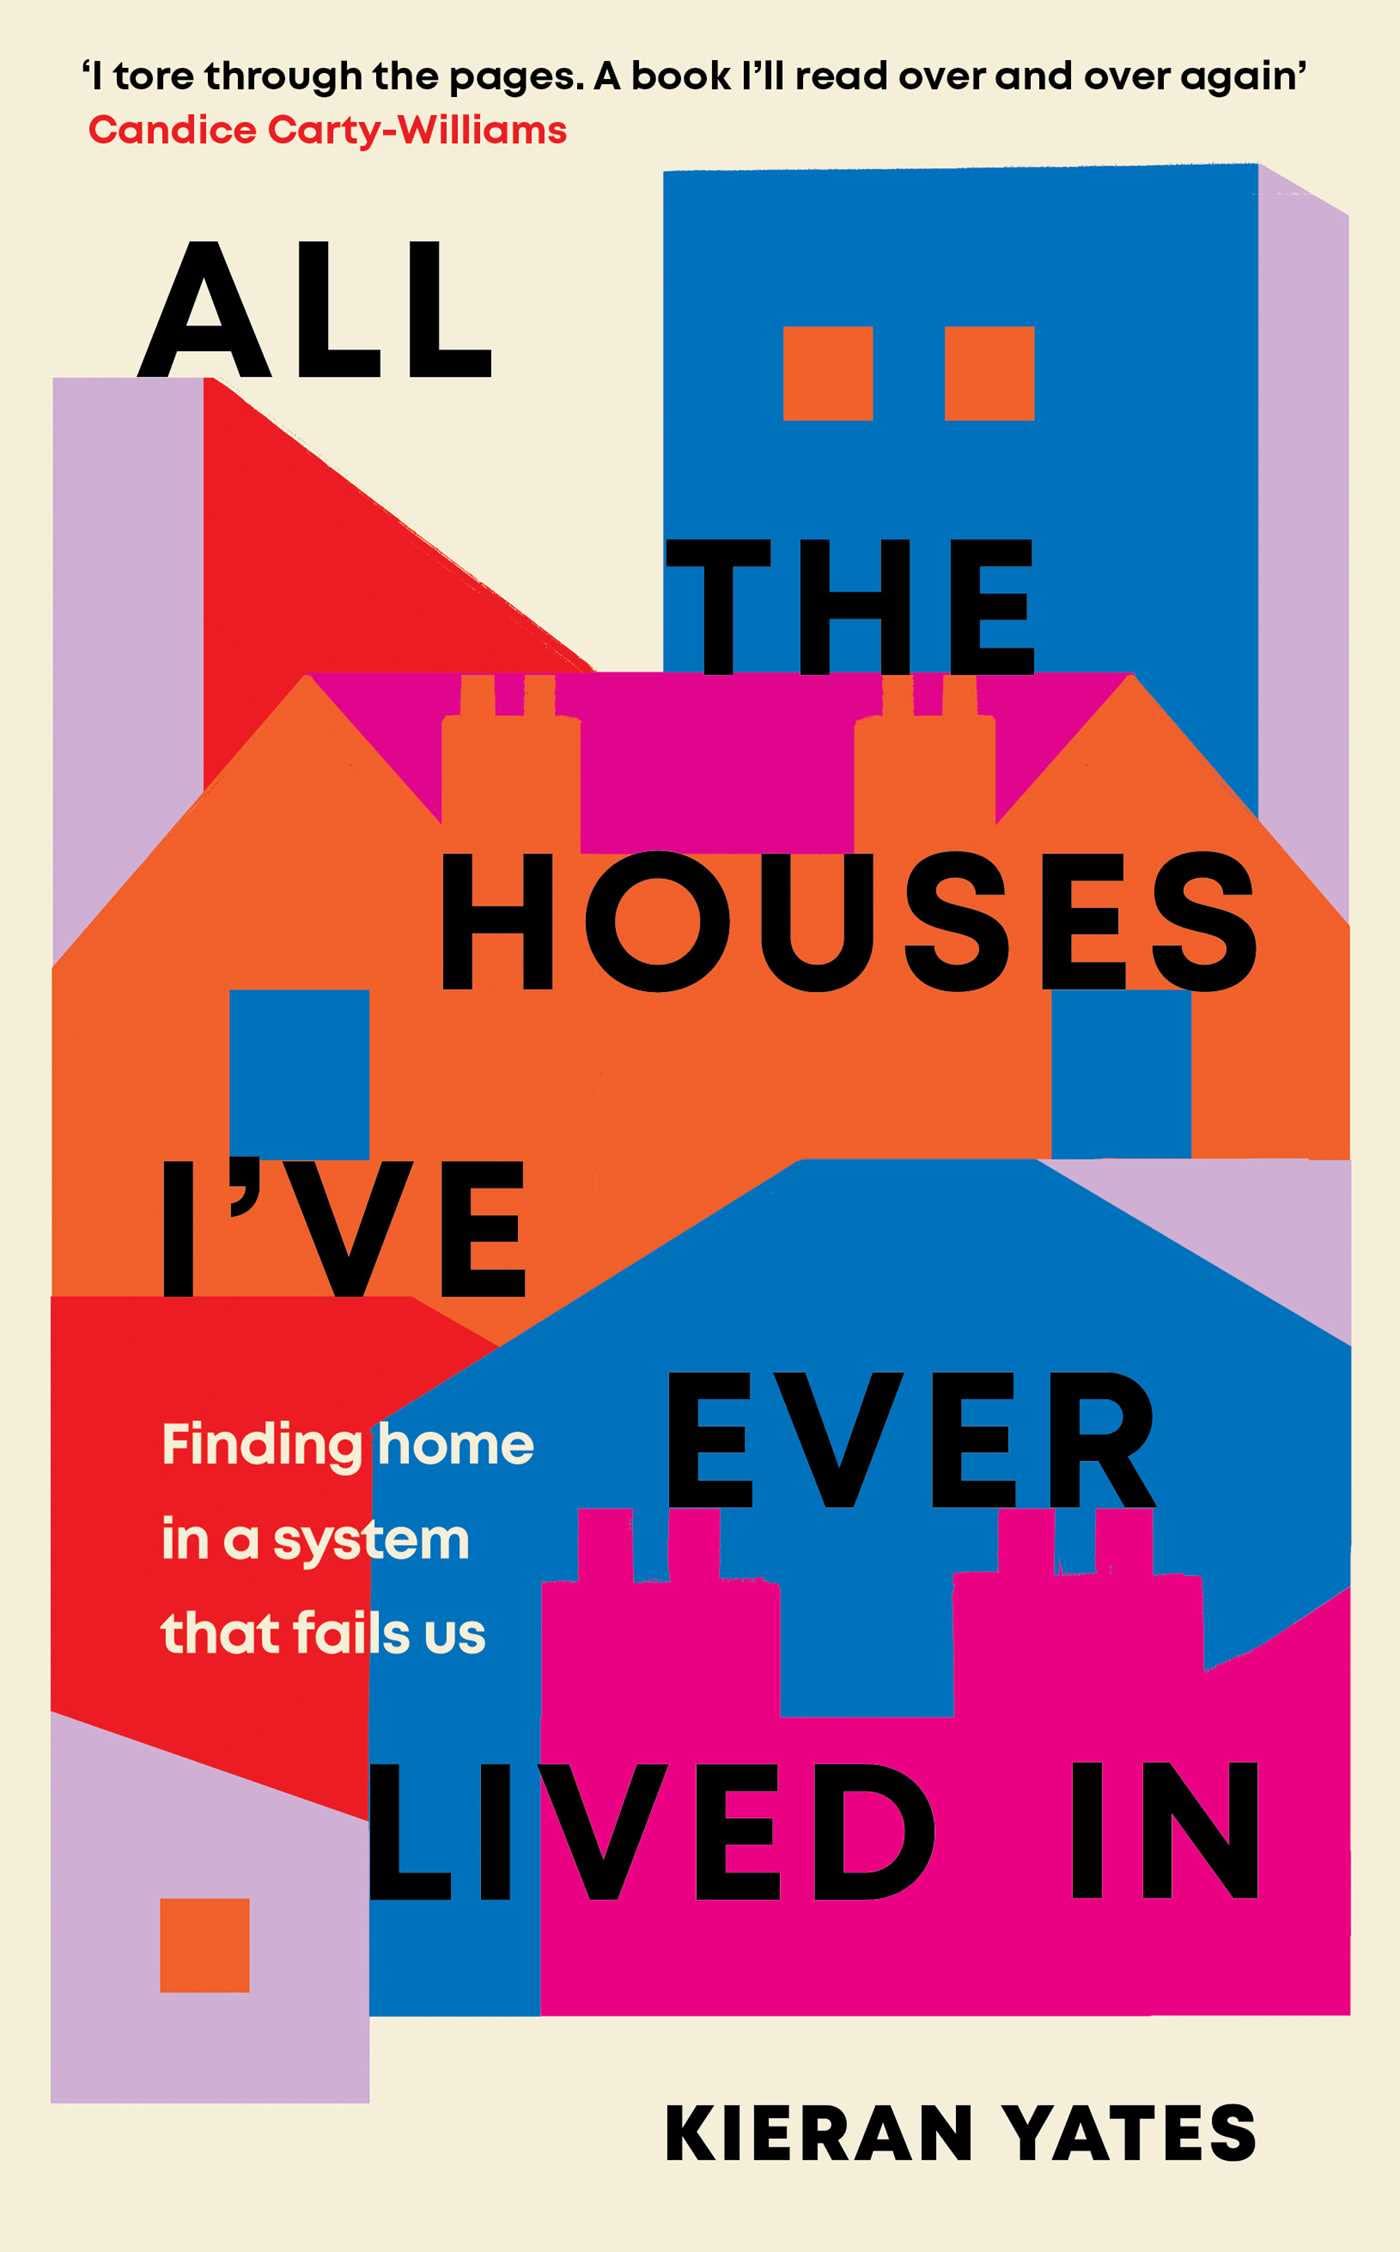 Kieran Yates’s ‘All the Houses I’ve Ever Lived In’, which is in shops now